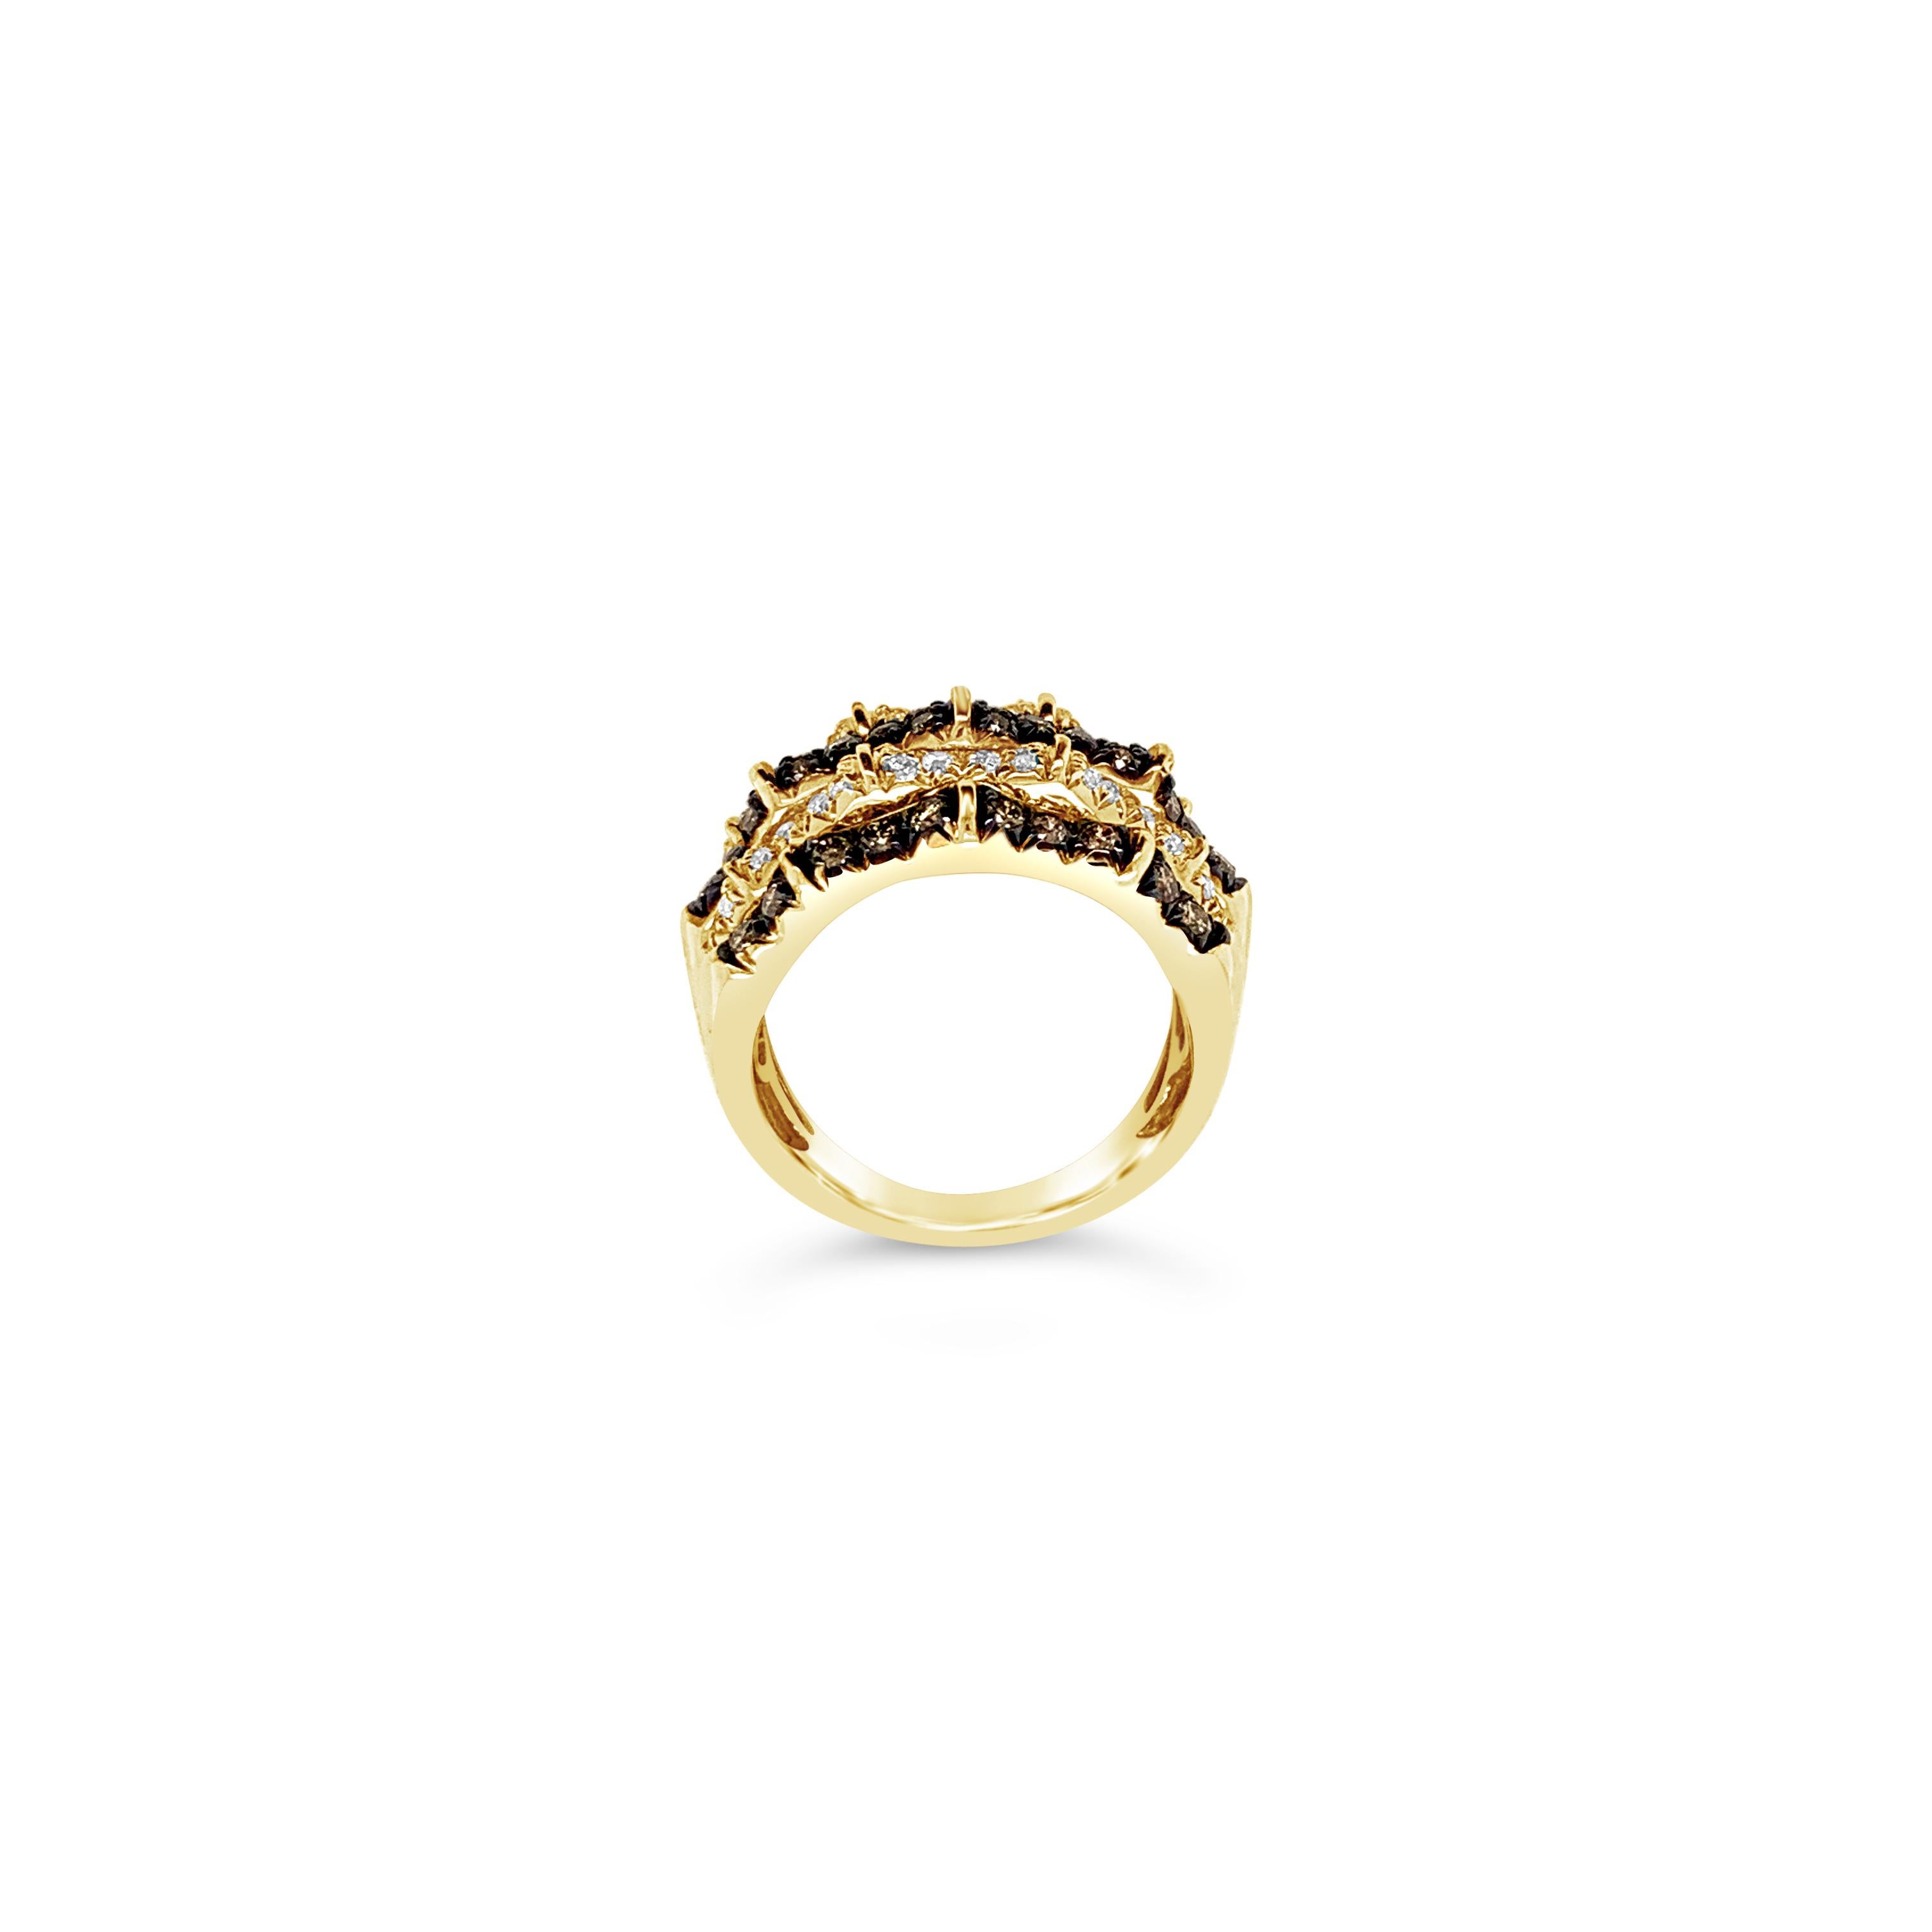 Le Vian® Ring featuring .46 cts. Vanilla Diamonds®, .81 cts. Chocolate Diamonds® set in 14K Honey Gold™

Diamonds Breakdown:
.81 cts Brown Diamonds
.46 cts White Diamonds

Gems Breakdown:
None

Ring may or may not be sizable, please feel free to